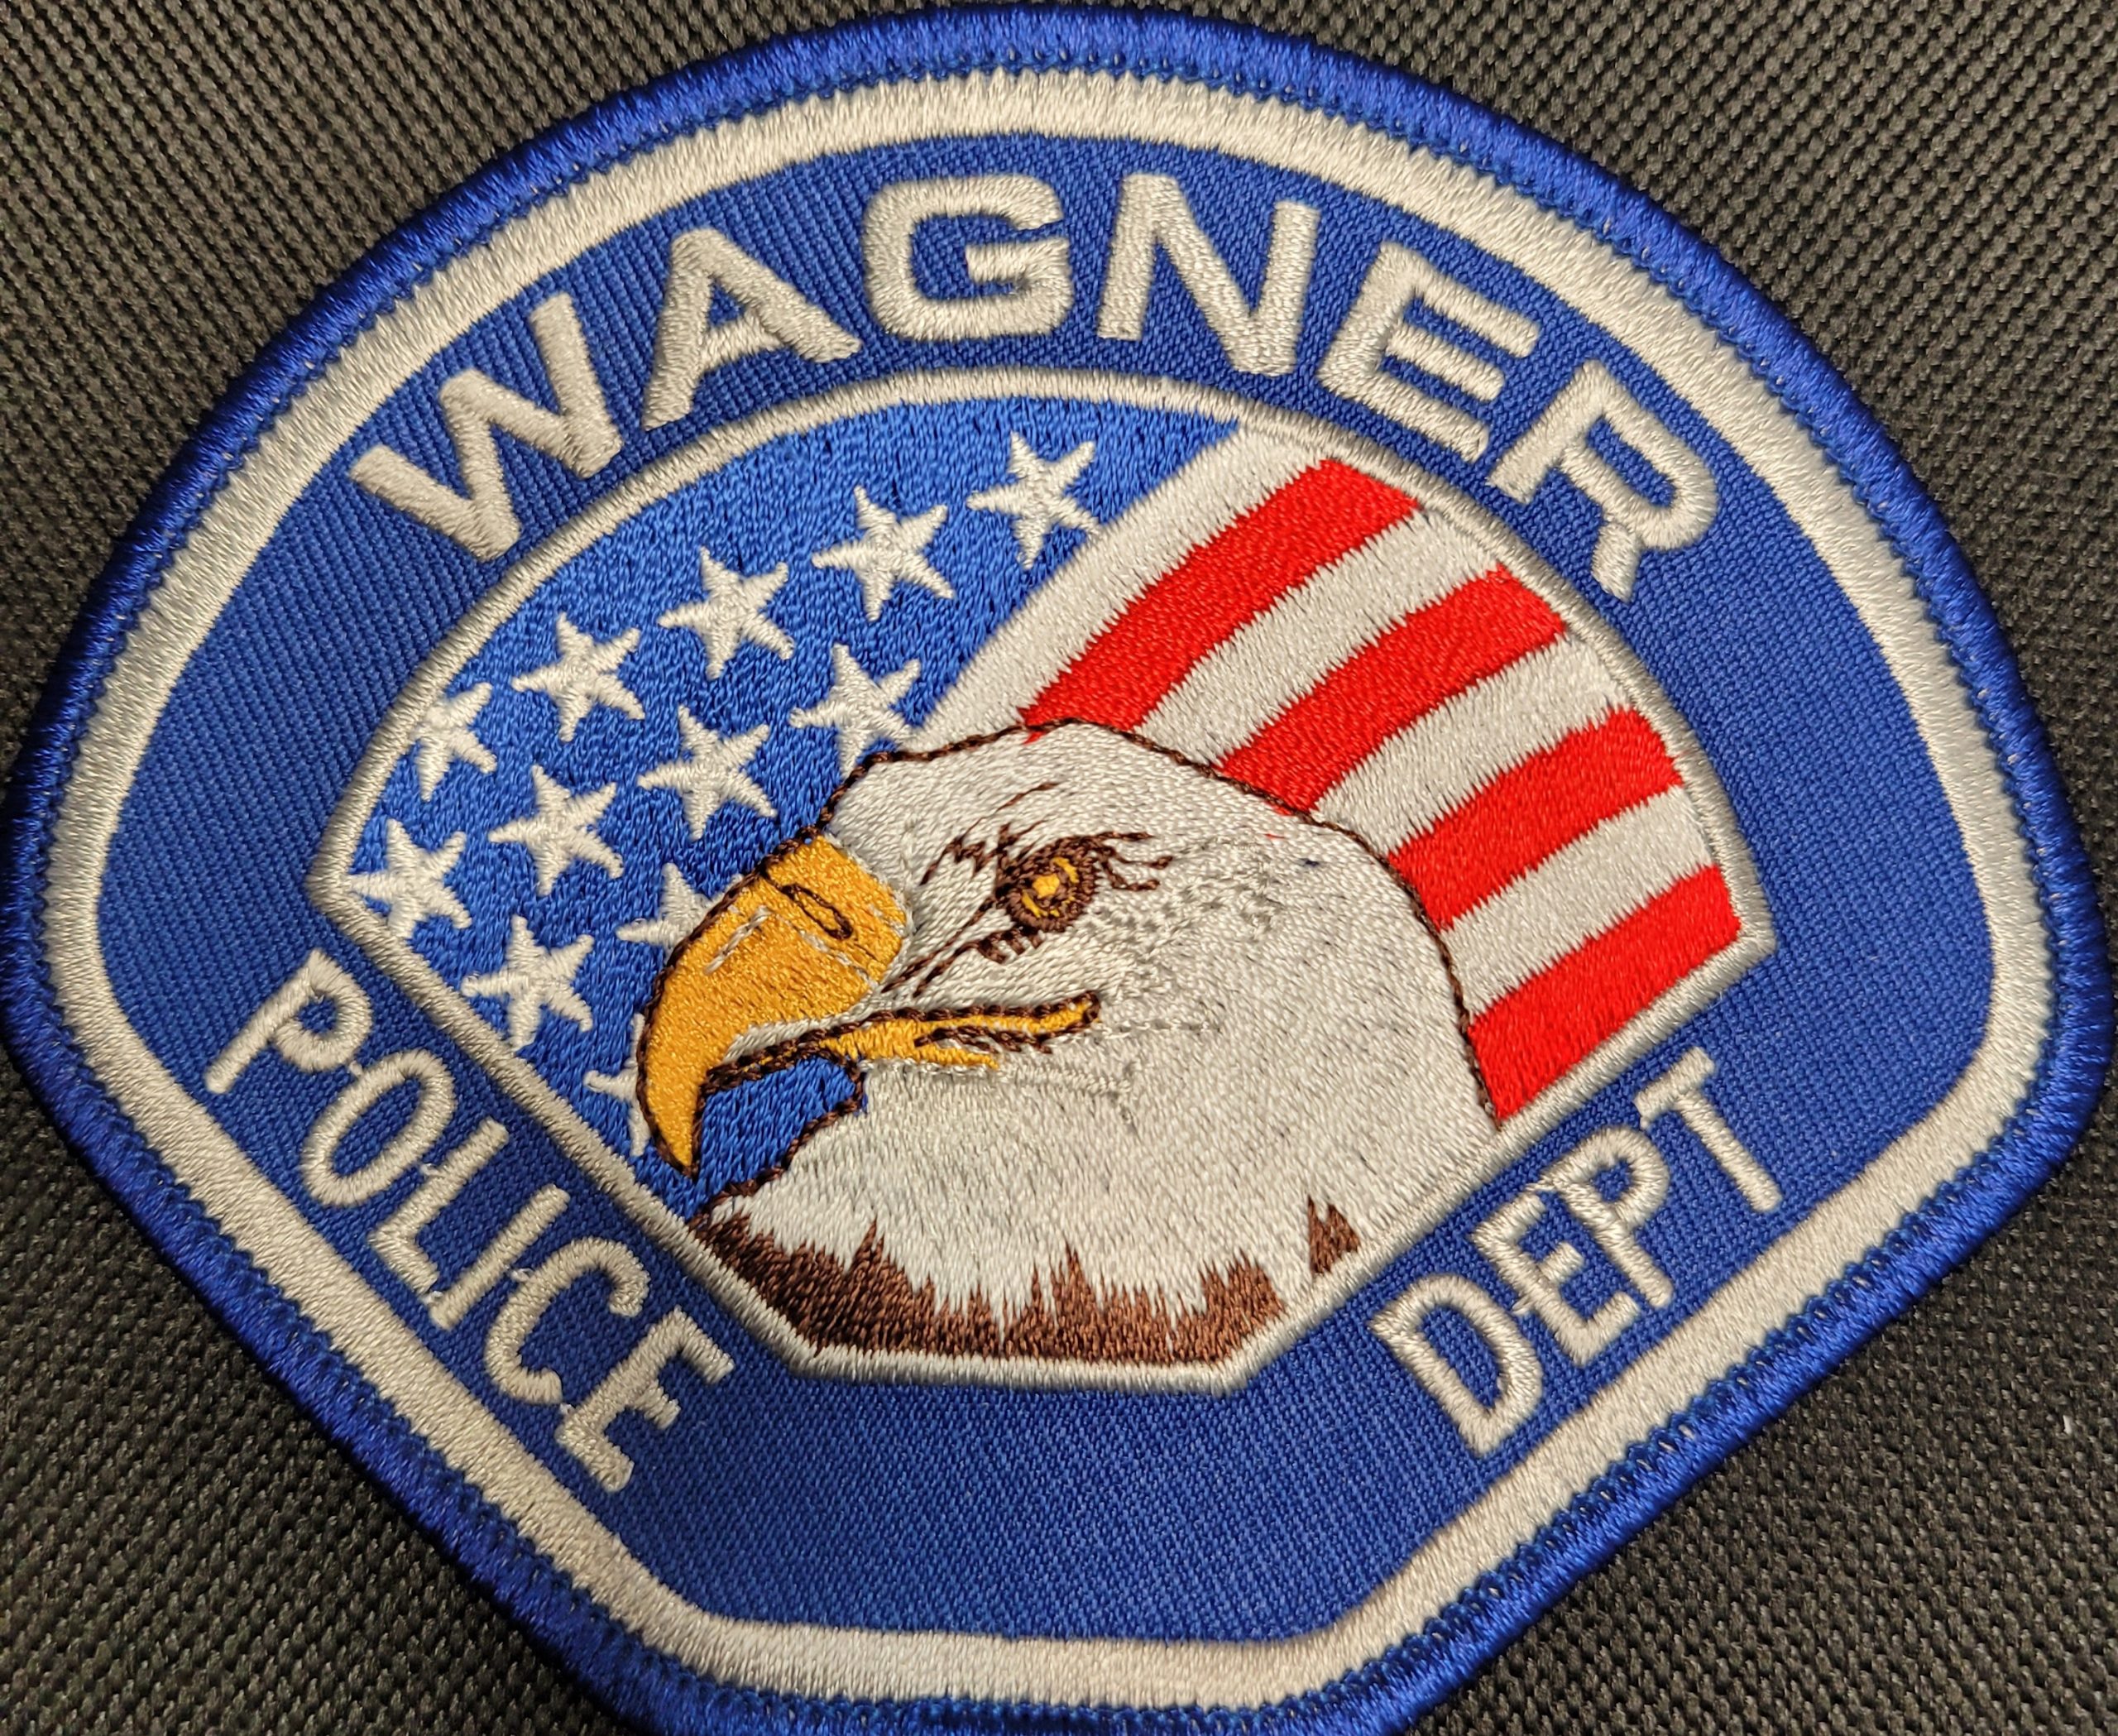 Wagner Police Department